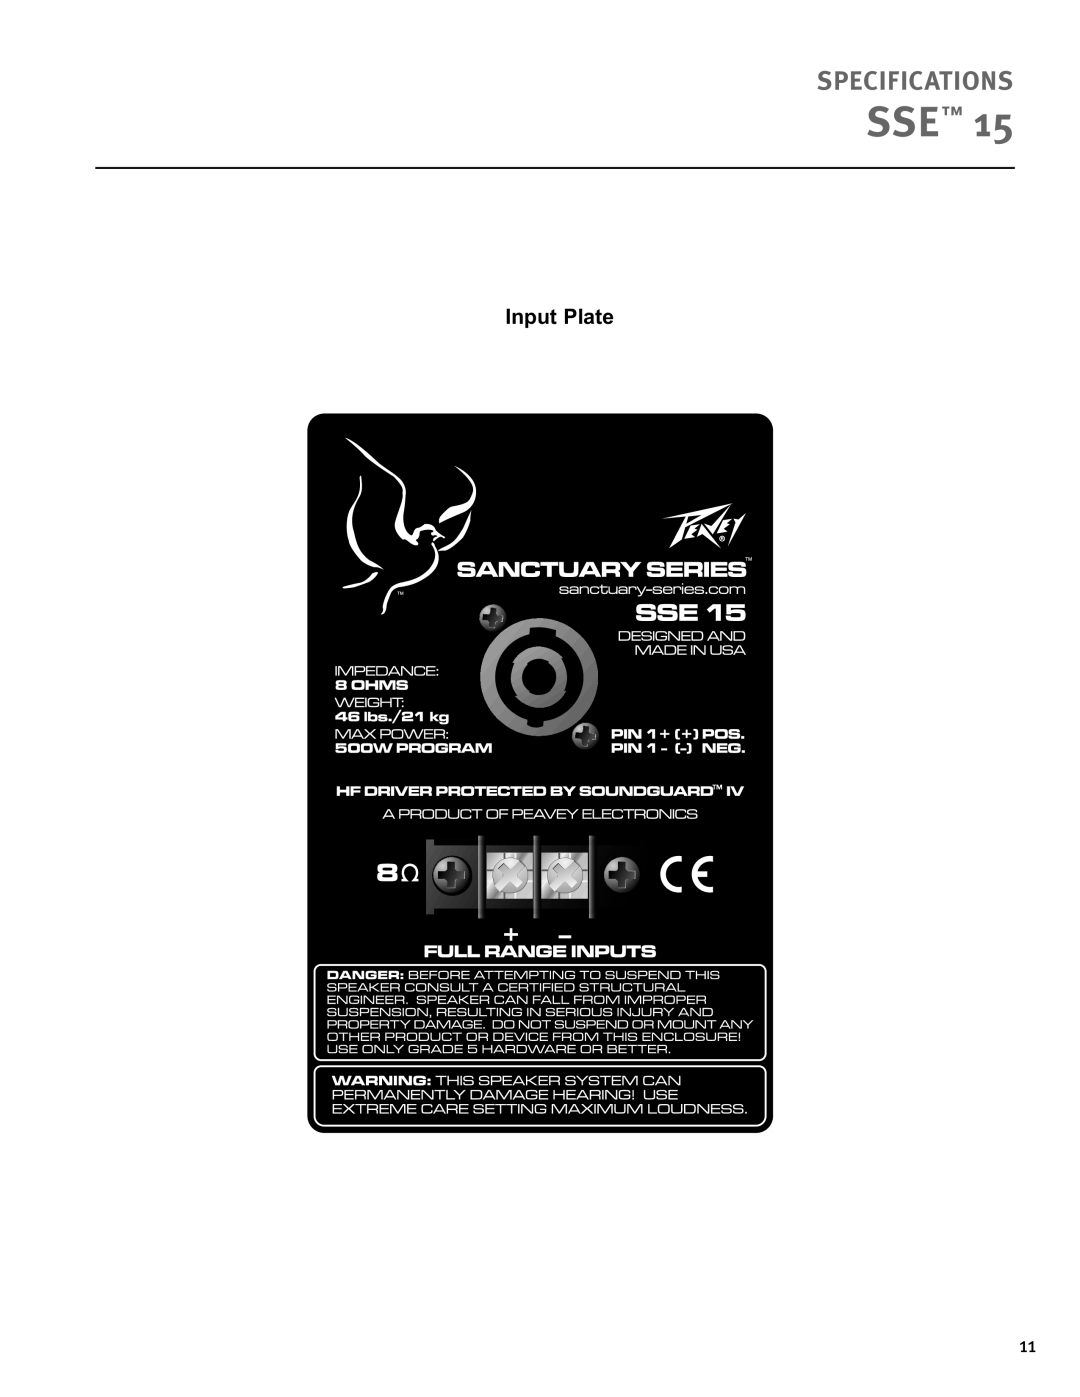 Peavey SSE 15 specifications Input Plate, Specifications 